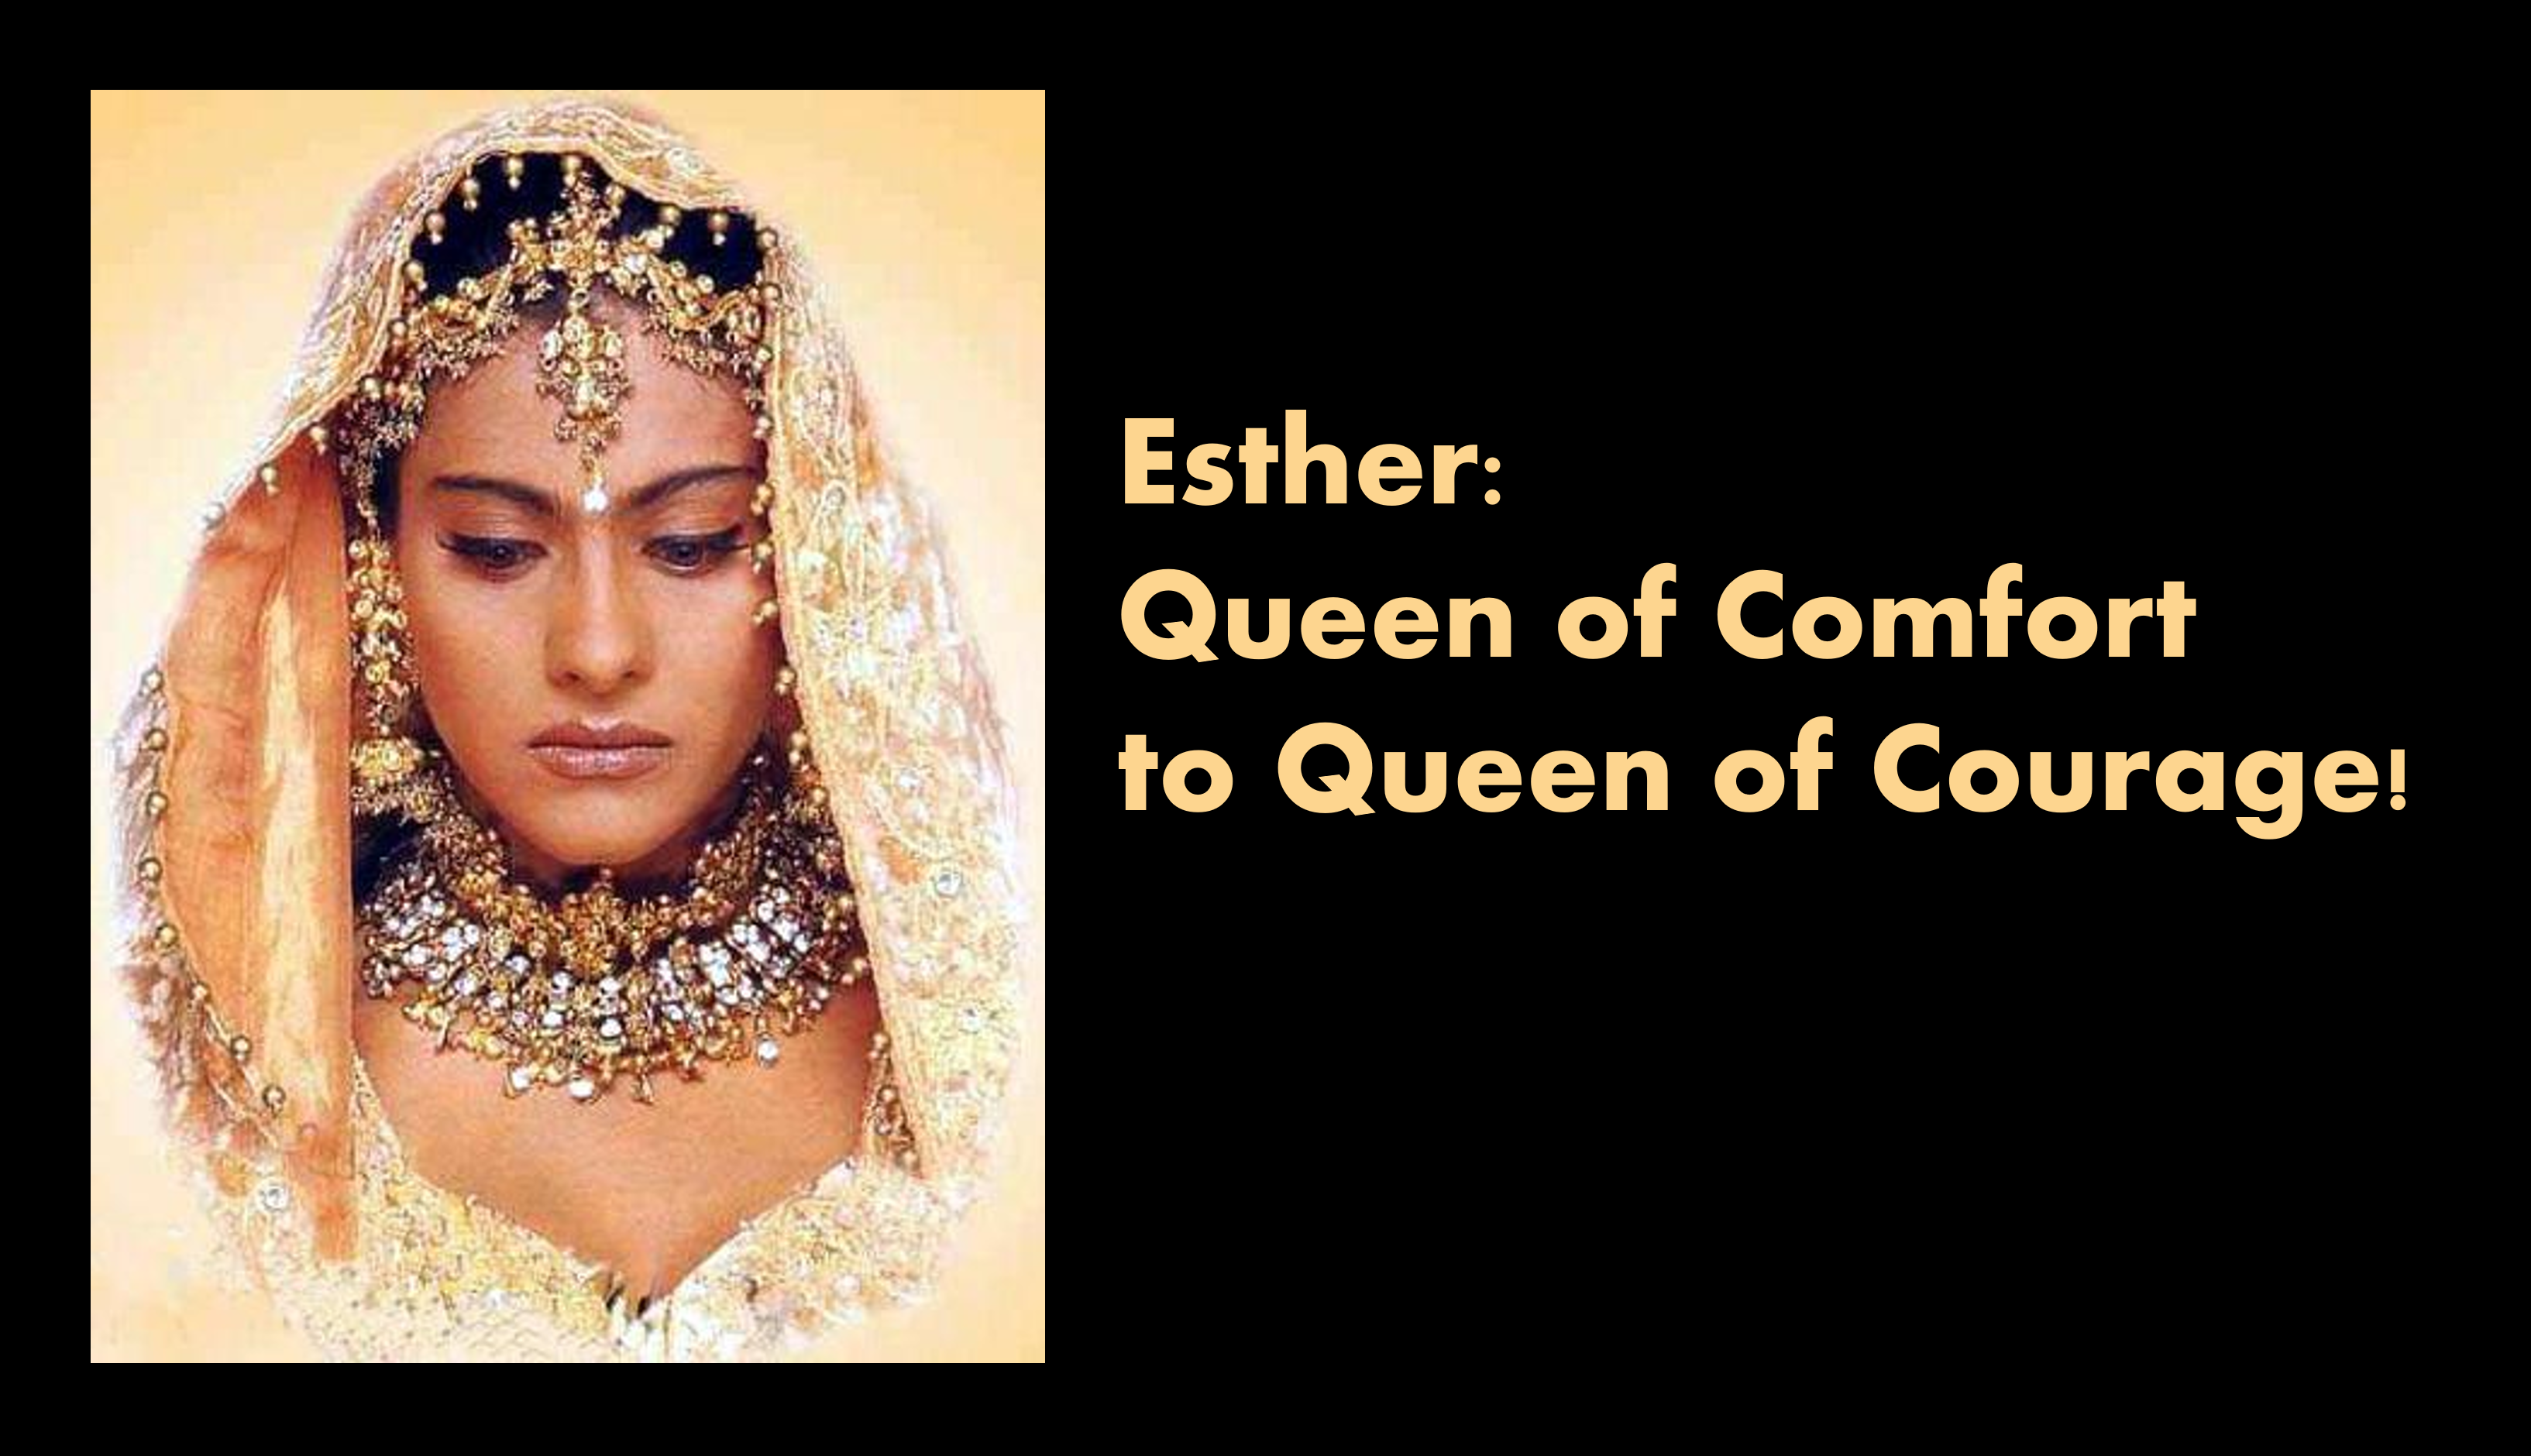 Esther – Queen of Comfort to Queen of Courage [The Diva God Used]